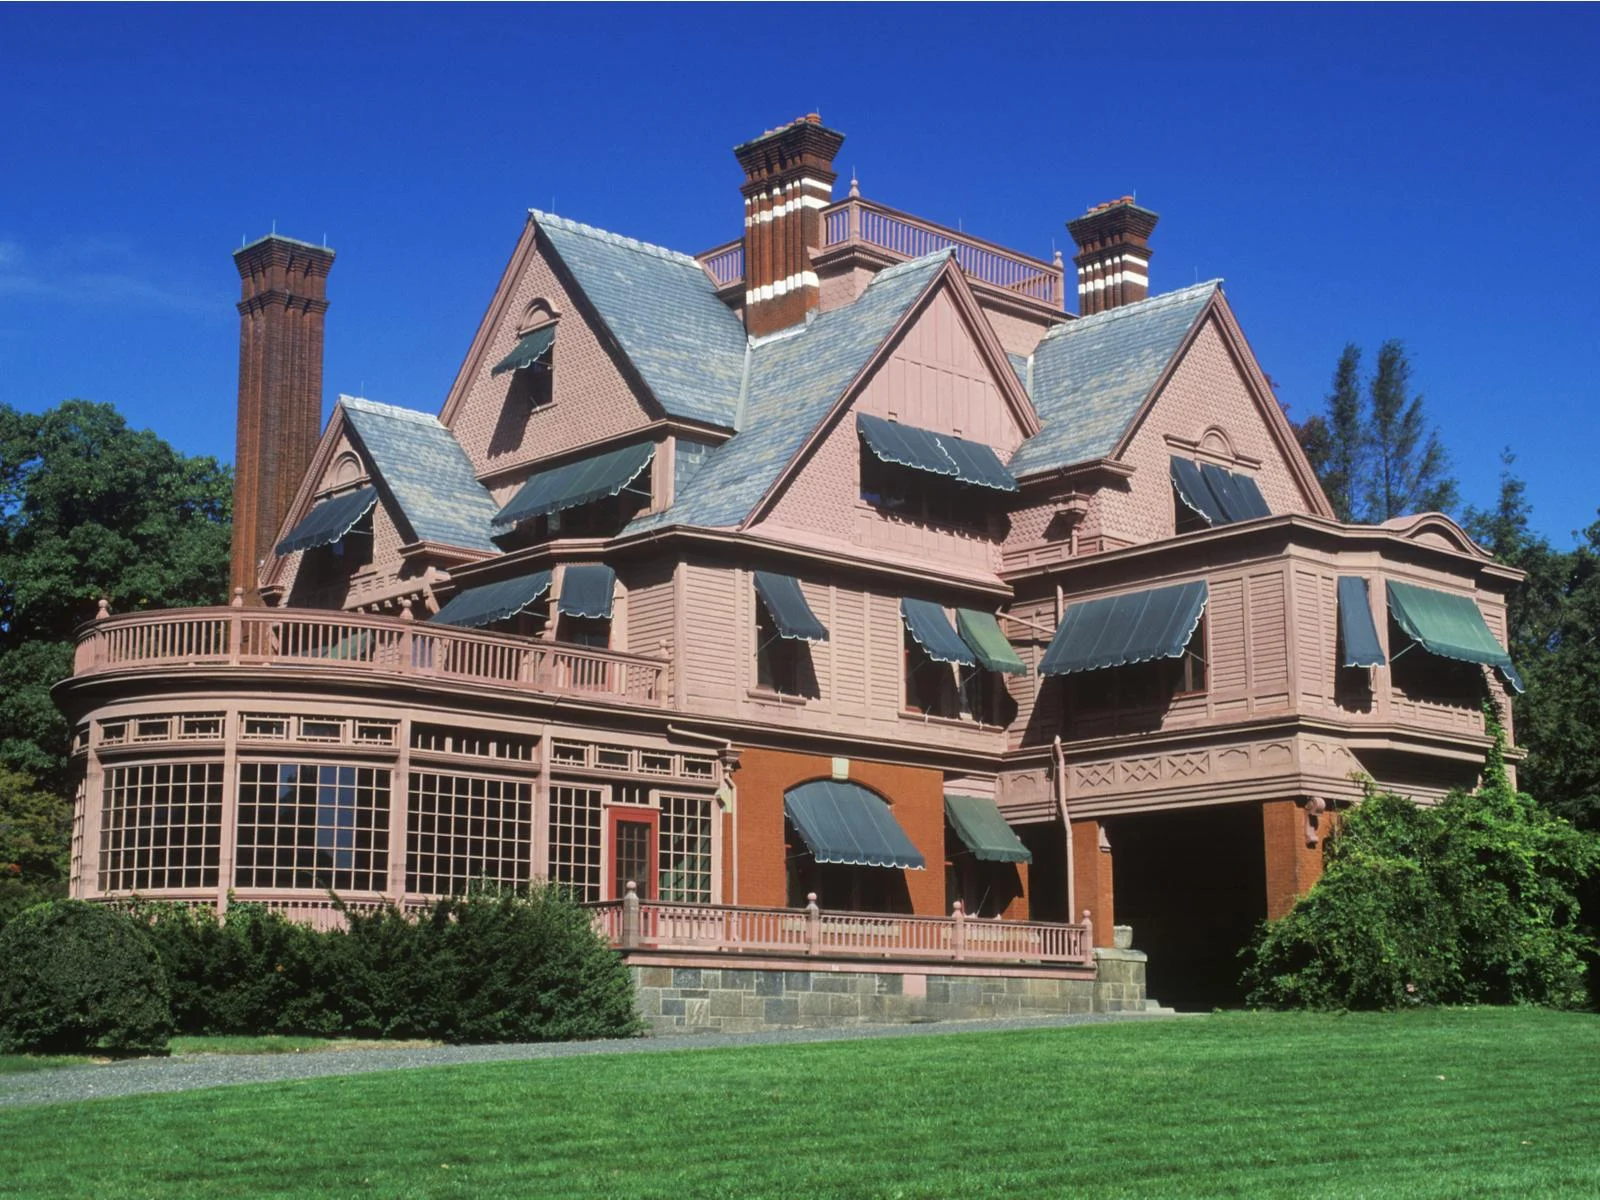 The massive house that was once a home of the renowned Thomas Edison at Thomas Edison National Historical Park, pictured on the outside a piece on the best things to do in New Jersey